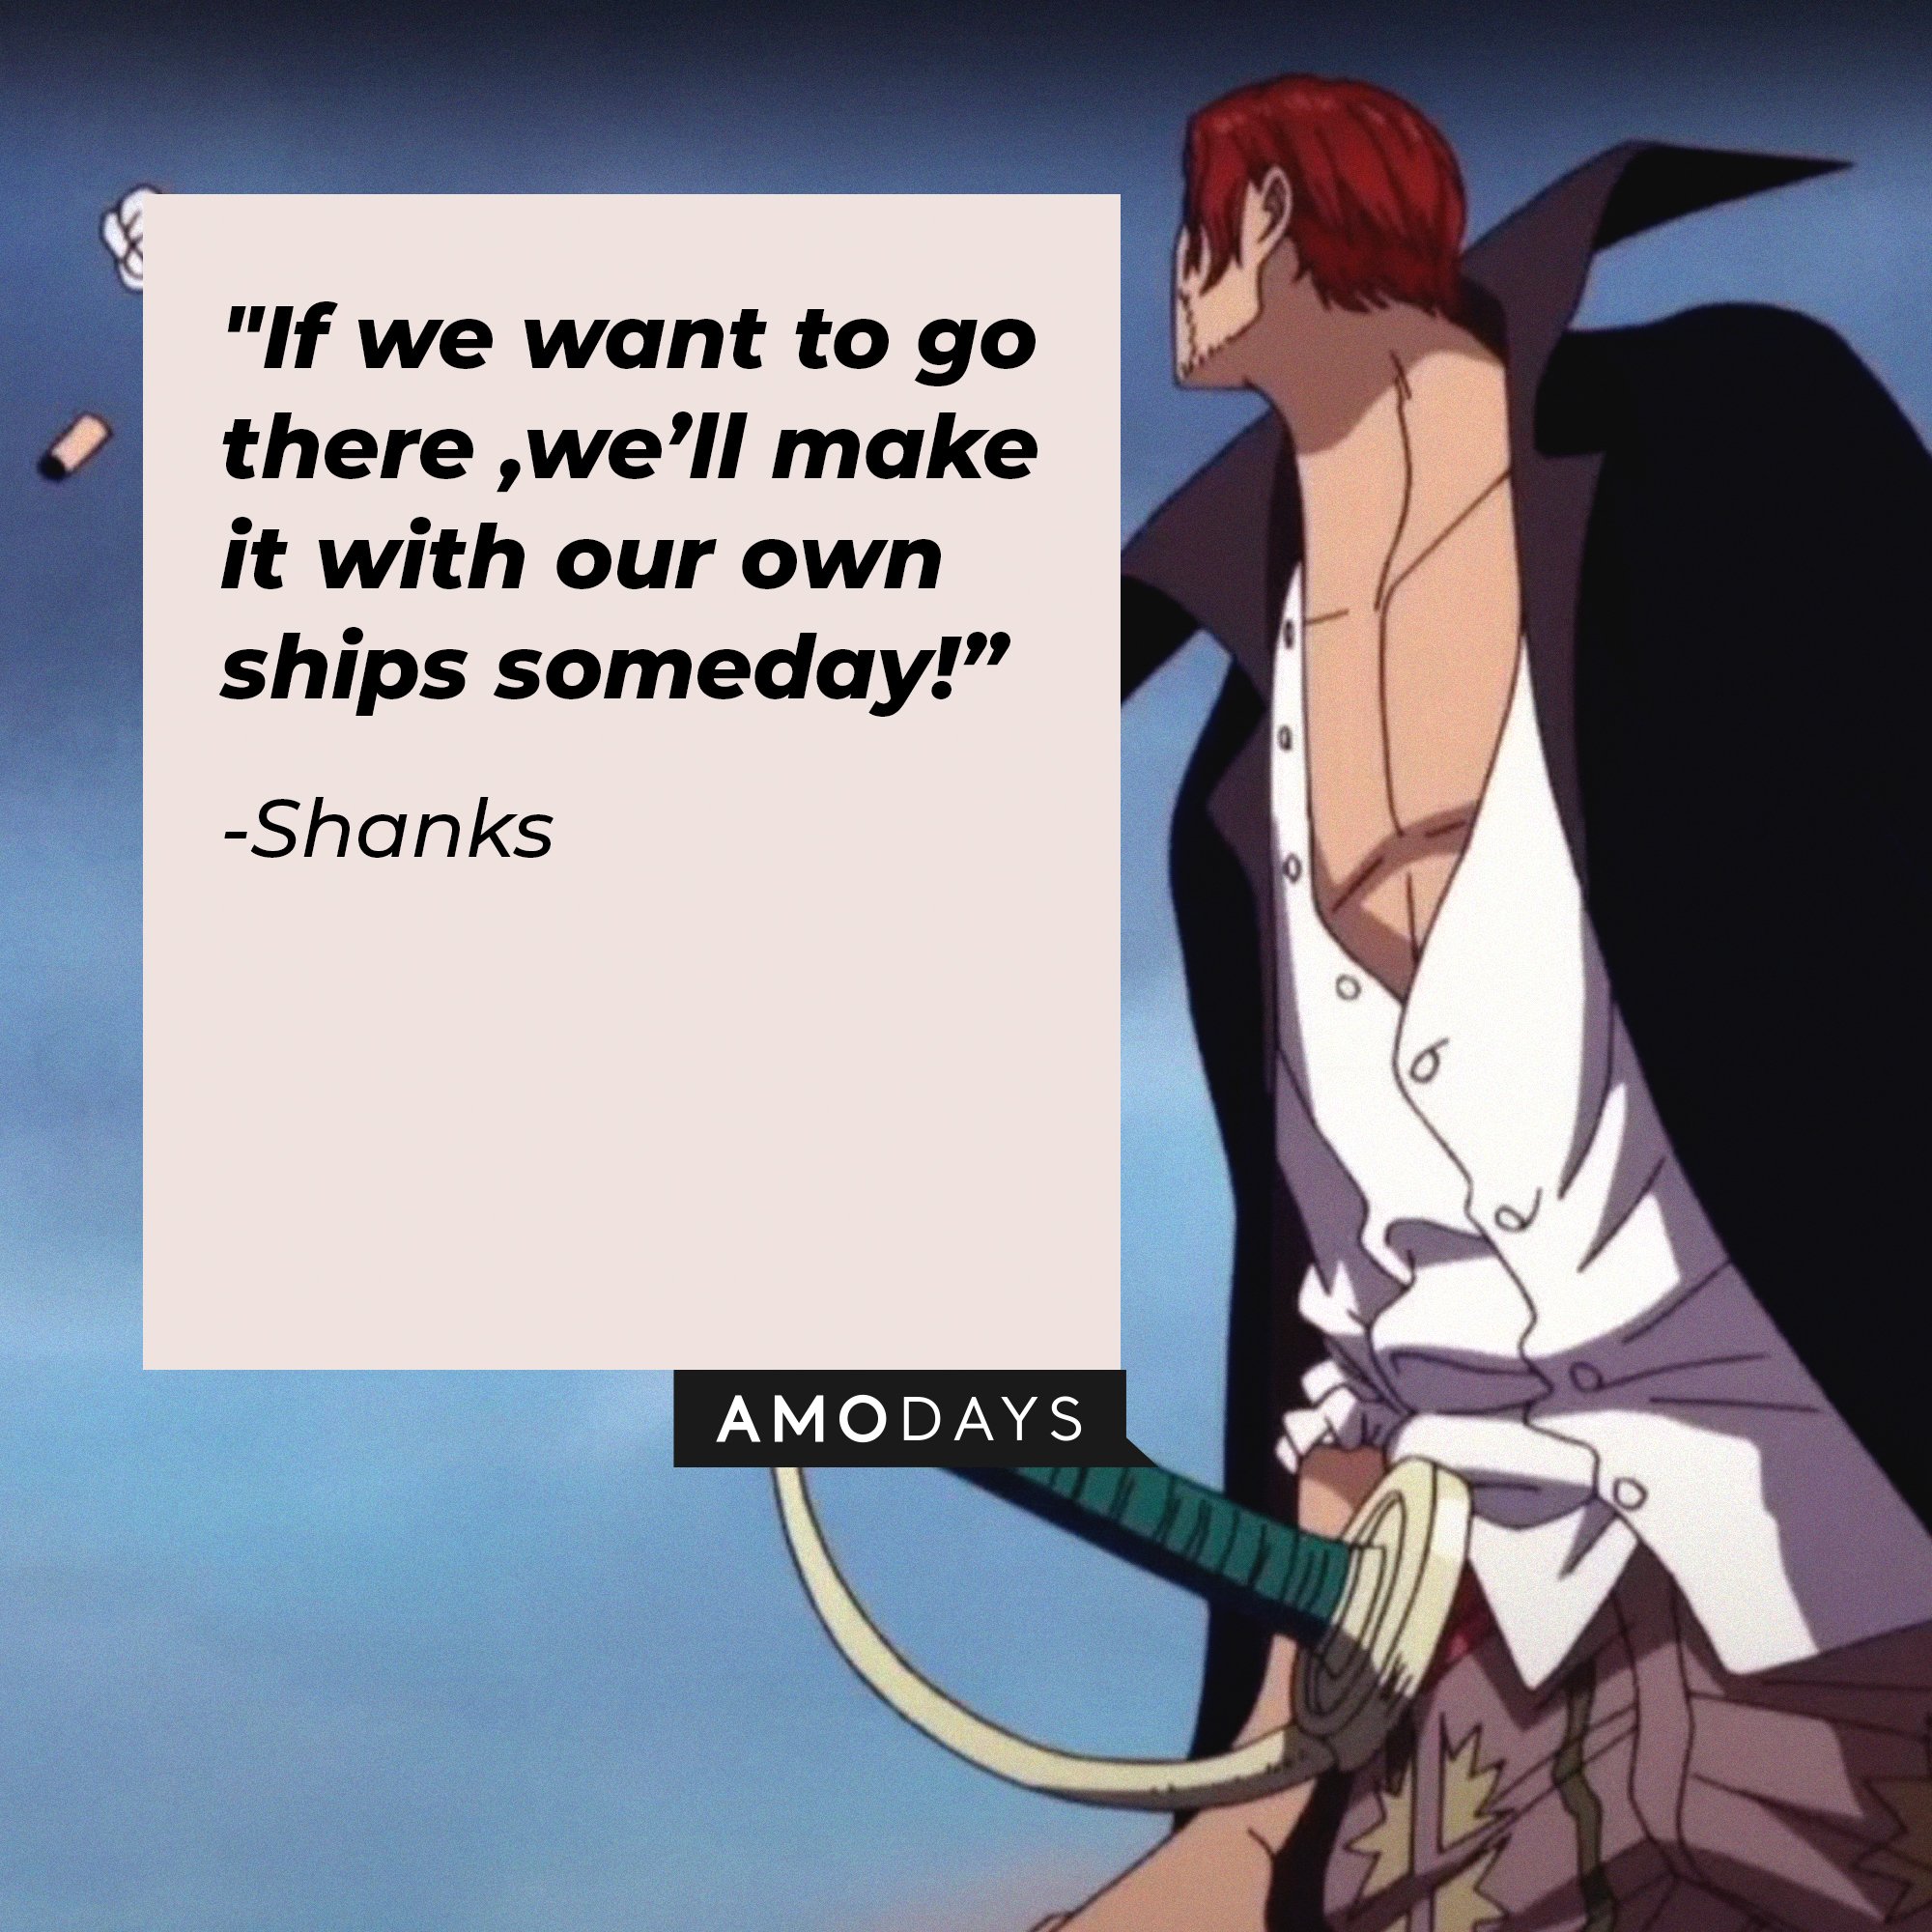 Shanks' quote: "If we want to go there, we'll make it with our own ships someday!" | Image: AmoDays